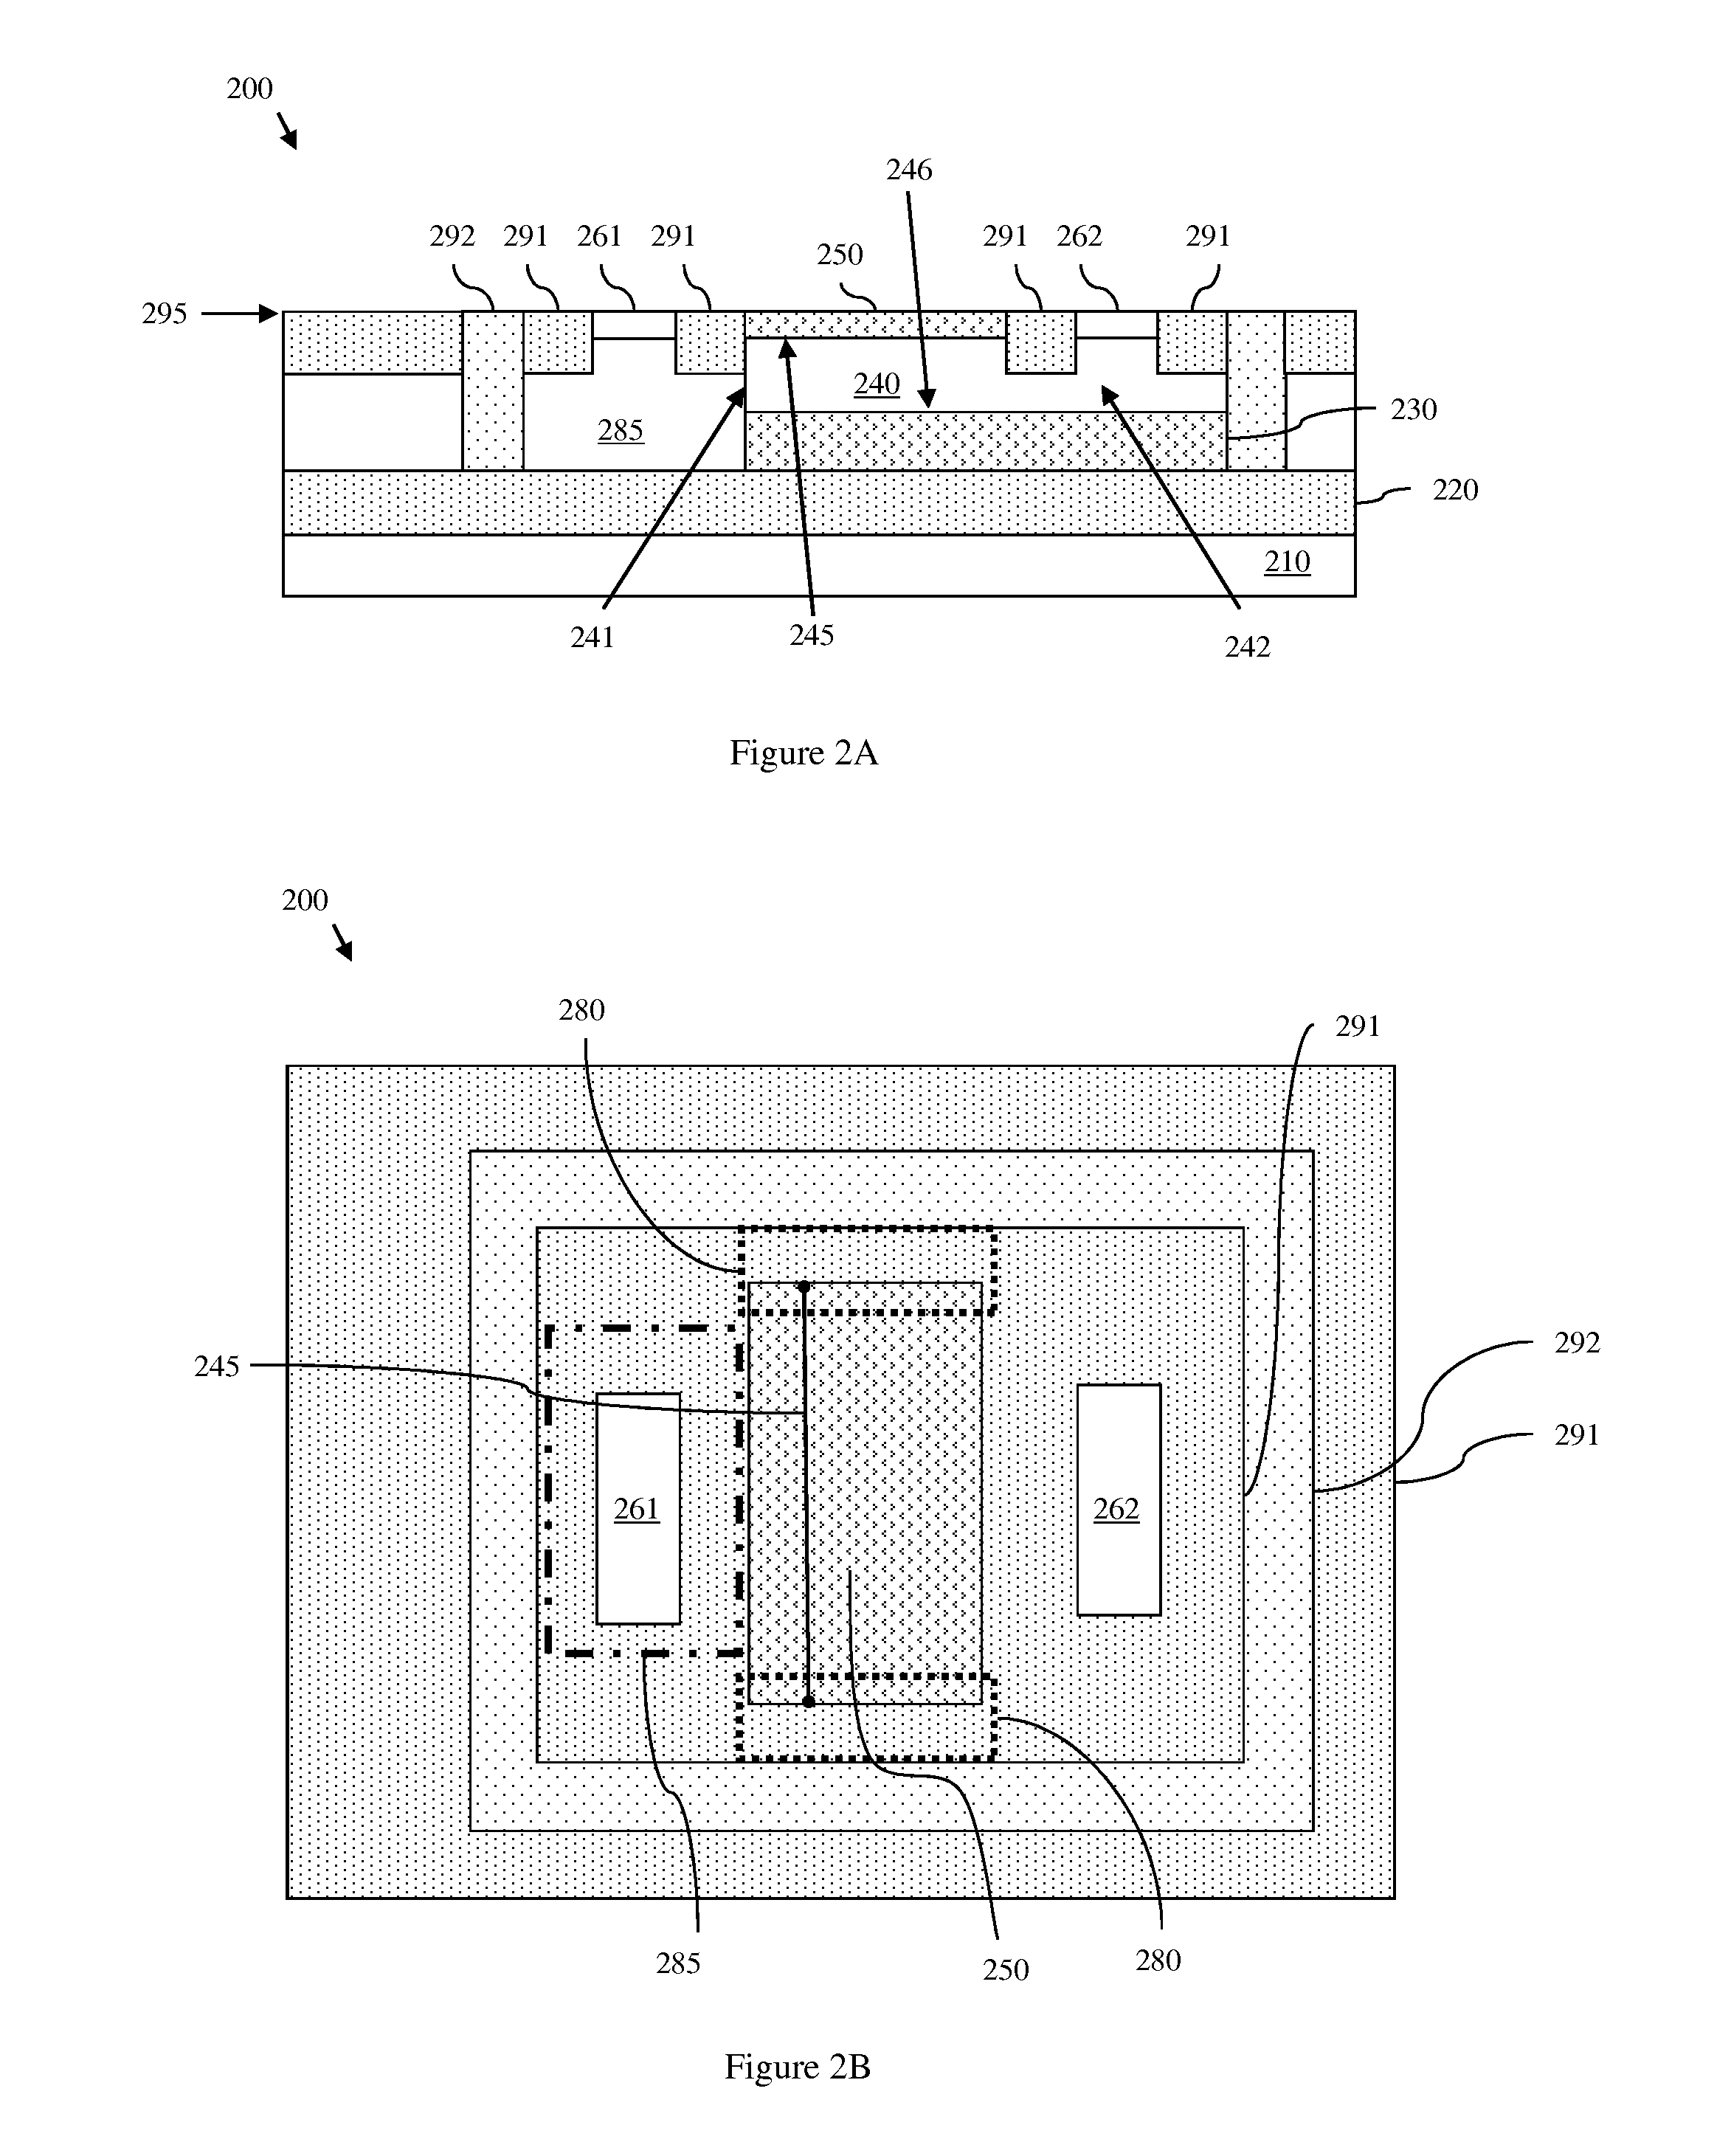  asymmetric silicon-on-insulator (SOI) junction field effect transistor (JFET), a method of forming the asymmetrical soi jfet, and a design structure for the asymmetrical soi jfet